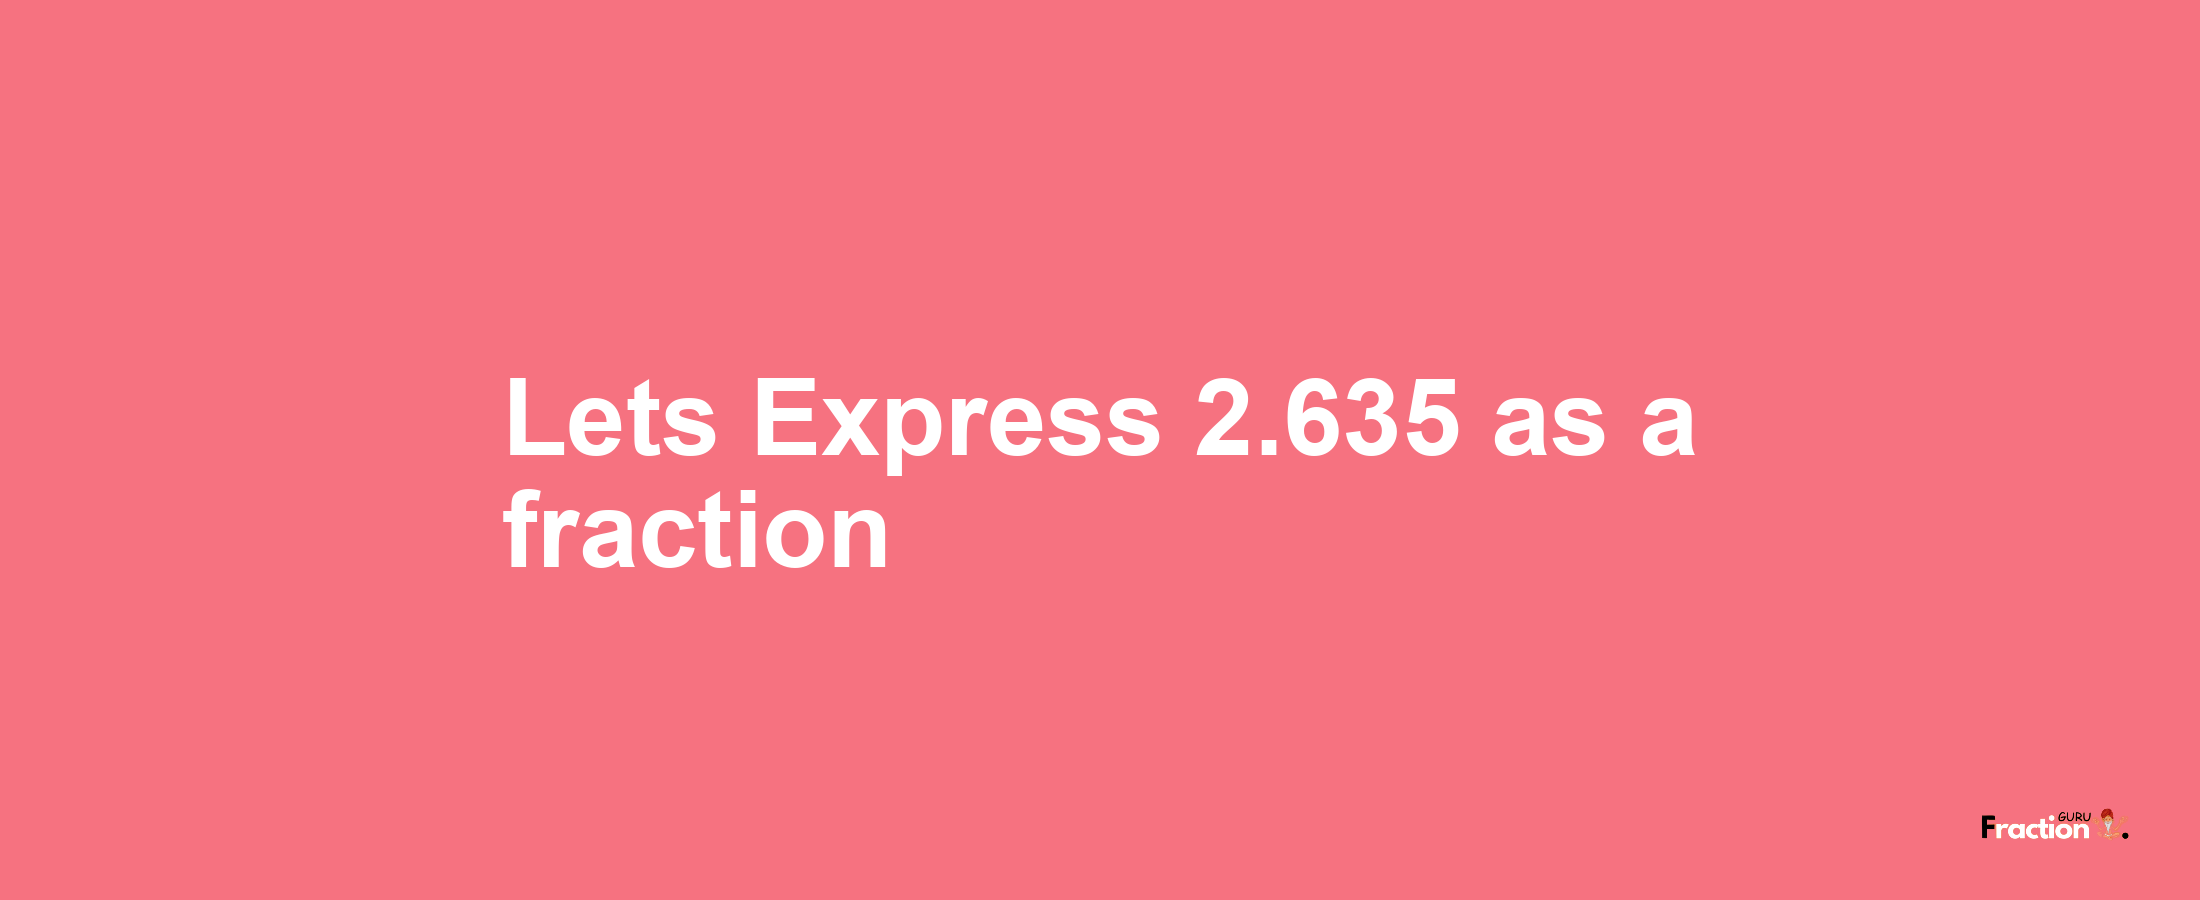 Lets Express 2.635 as afraction